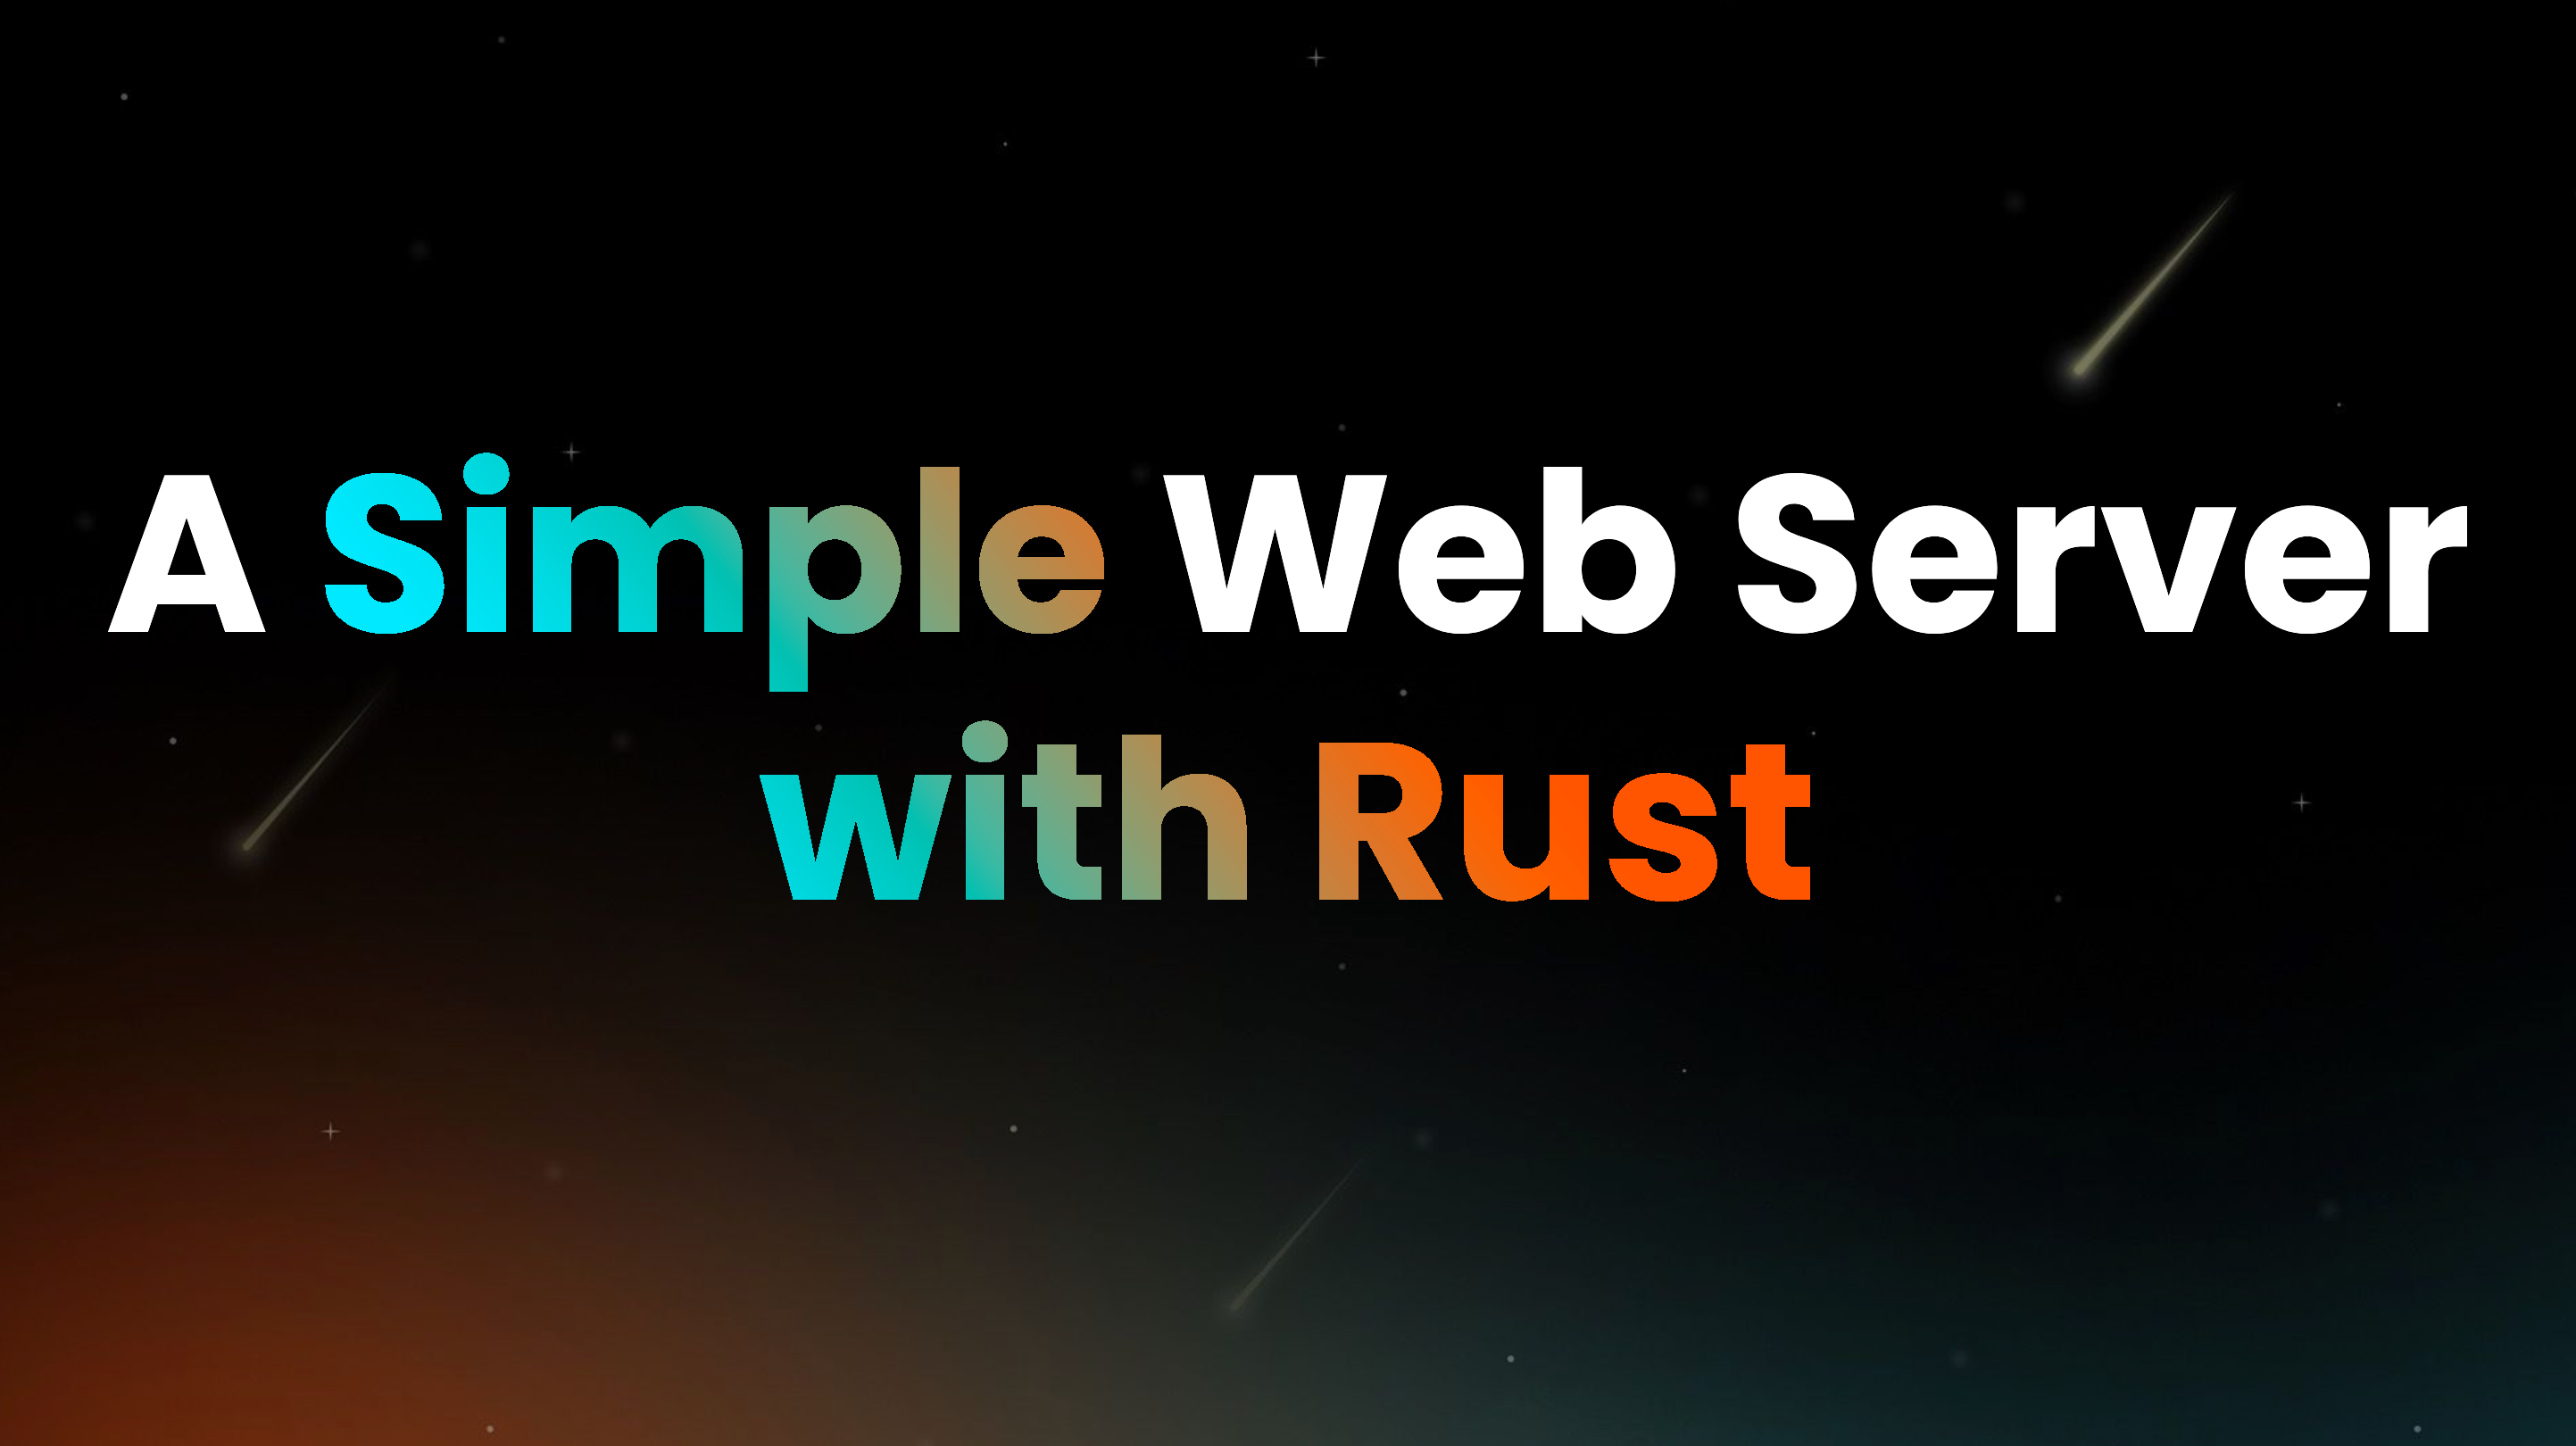 Building a Simple Web Server in Rust